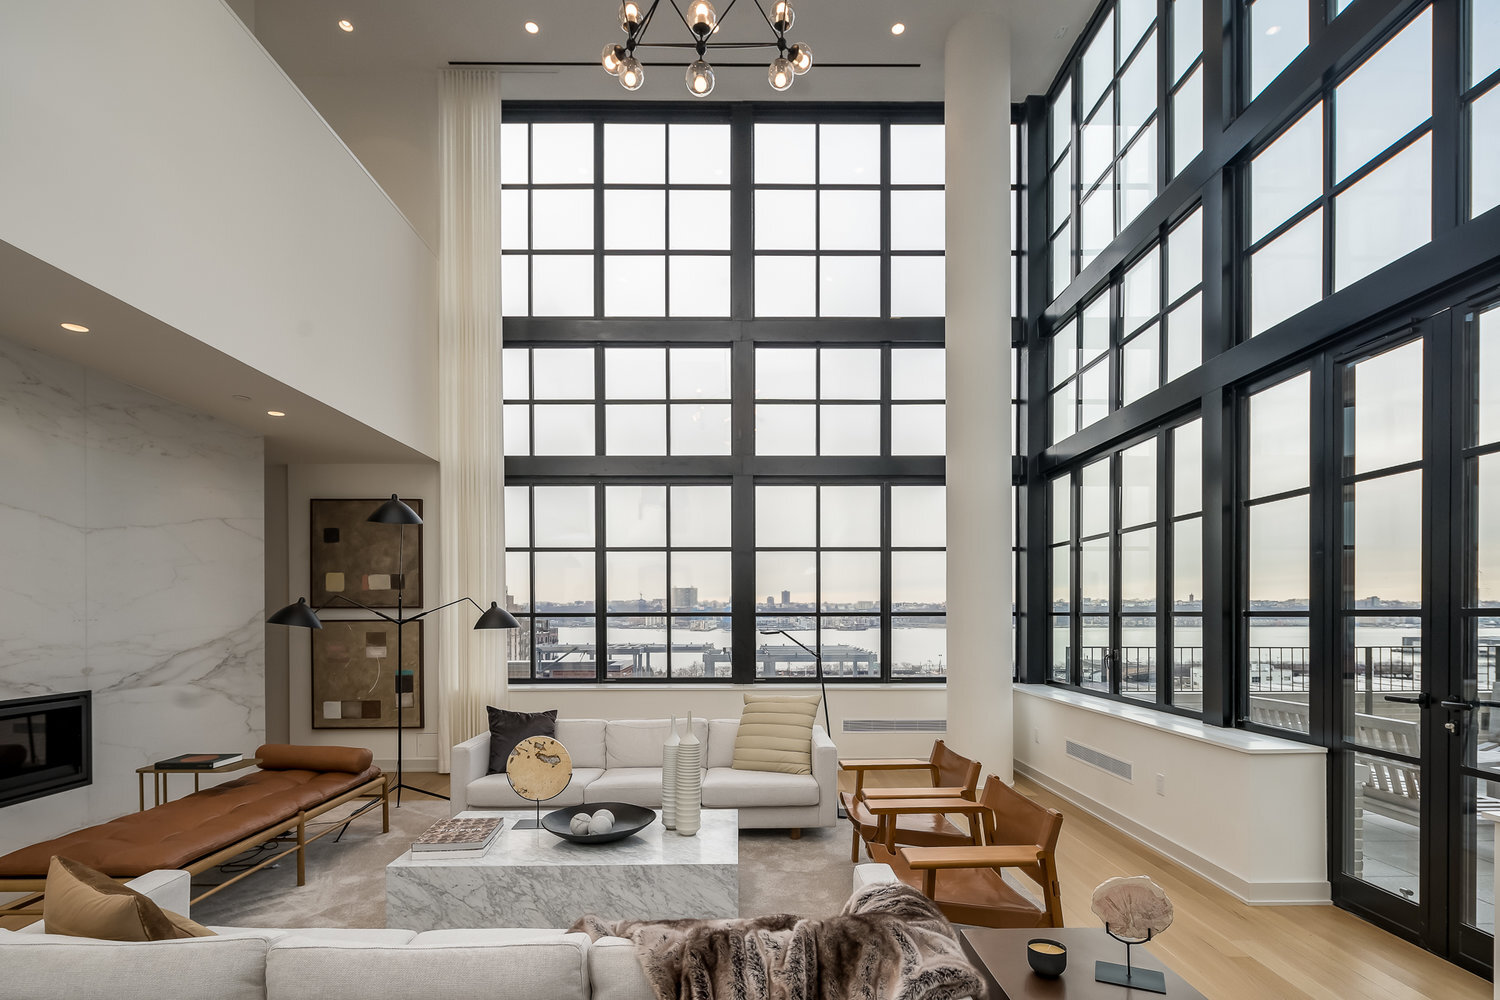 Architectural photography of a penthouse overlooking the Hudson River